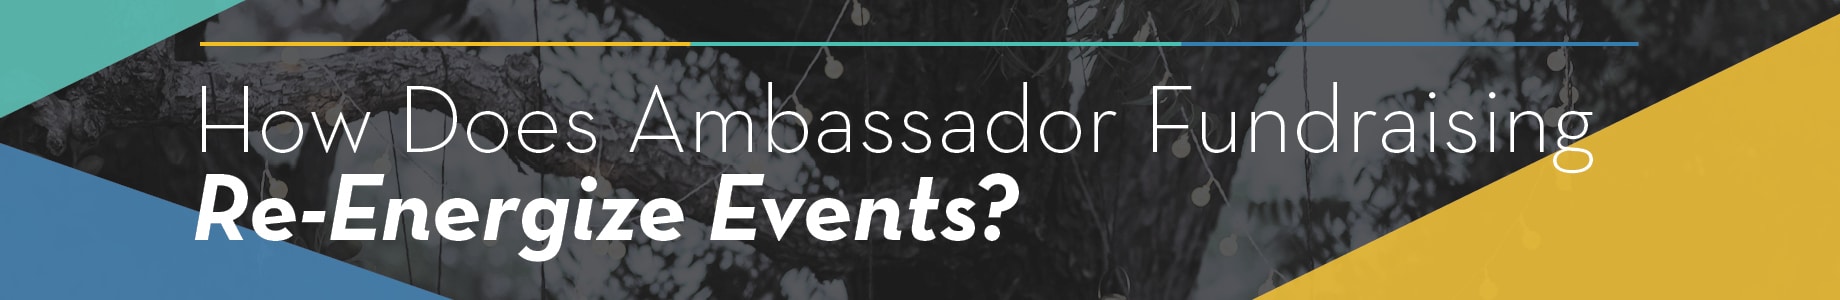 How Does Ambassador Fundraising Re-Energize Events 